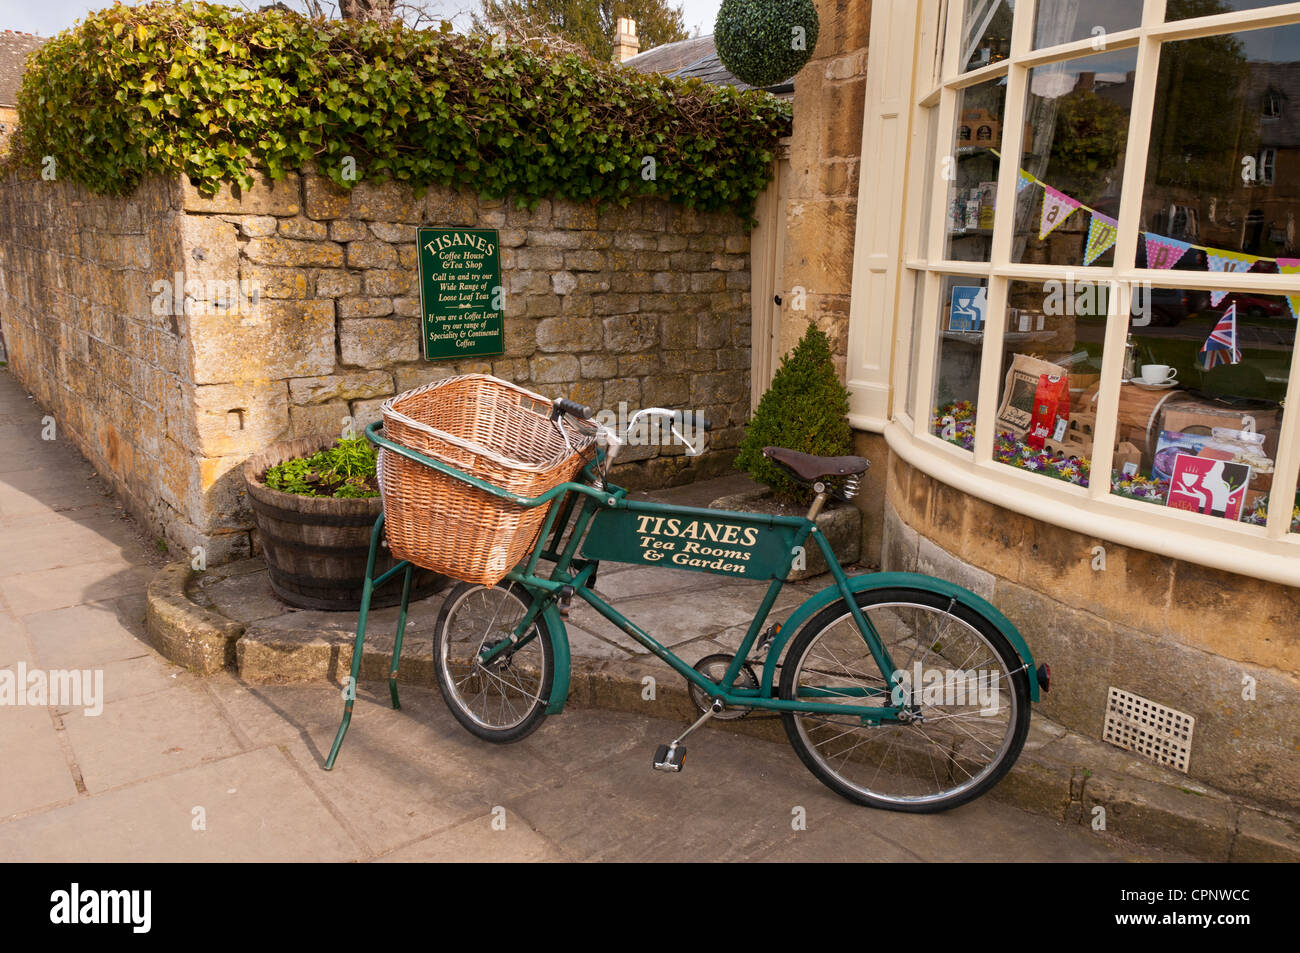 Old bike used as shop sign for Tisanes Tea Rooms, Broadway, Worcestershire, Cotswolds, UK Stock Photo